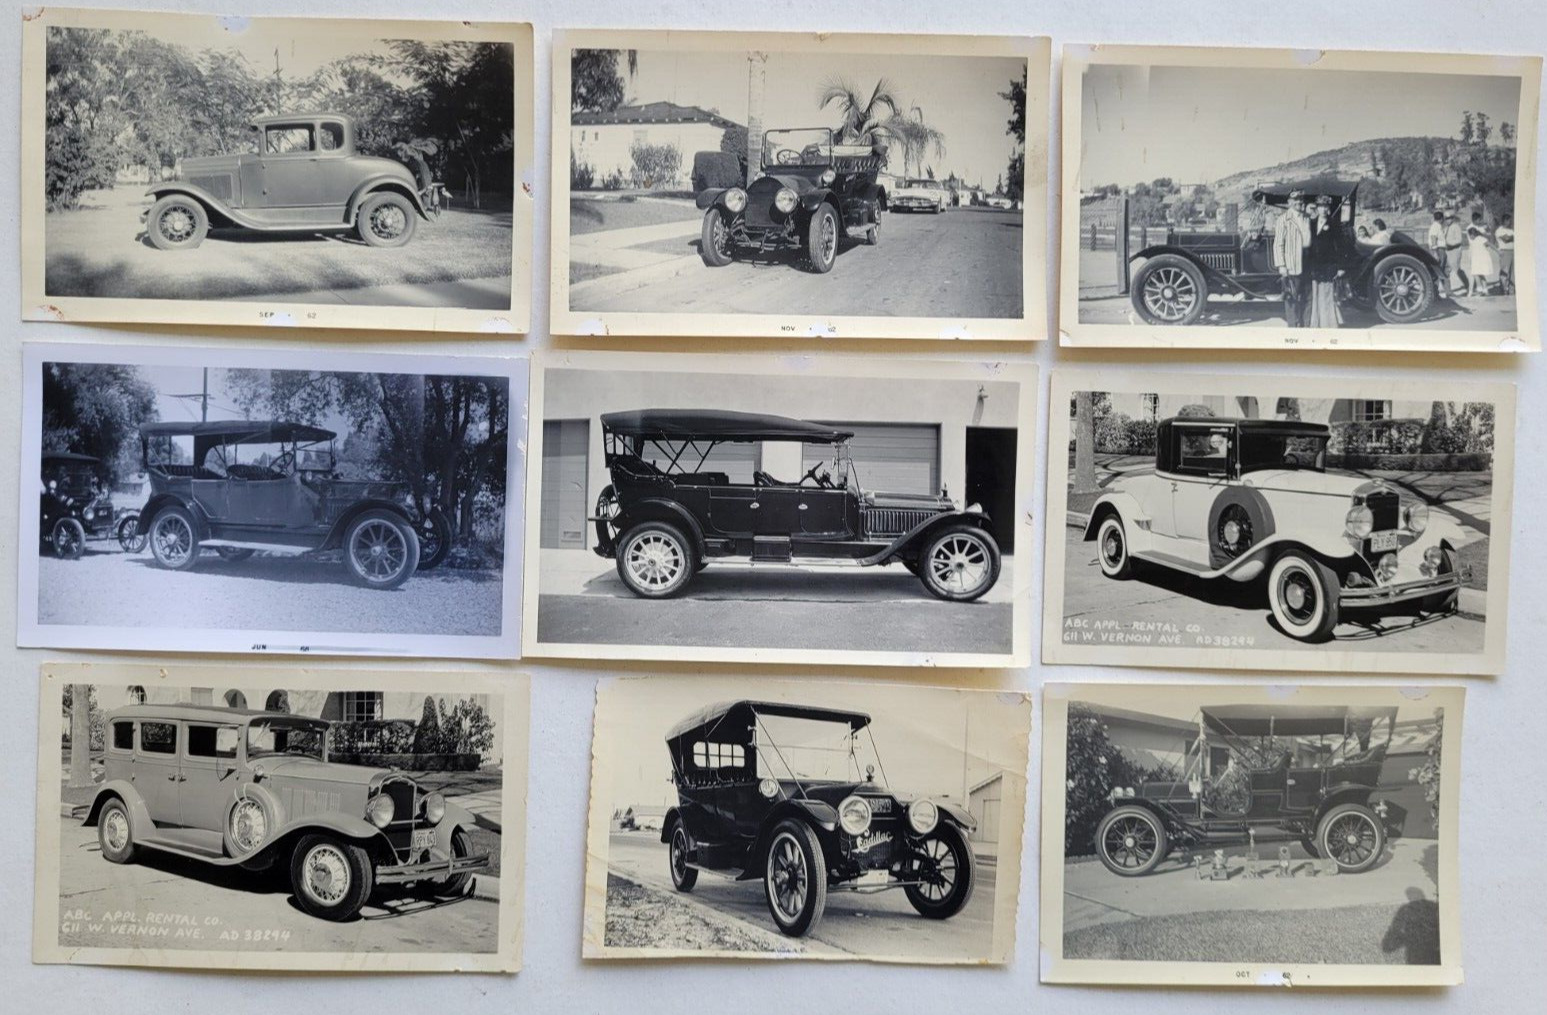 1962 PHOTOS...VERY OLD ELEGANT AMERICAN CARS 1910\'S TO 1930\'S LOT OF 9